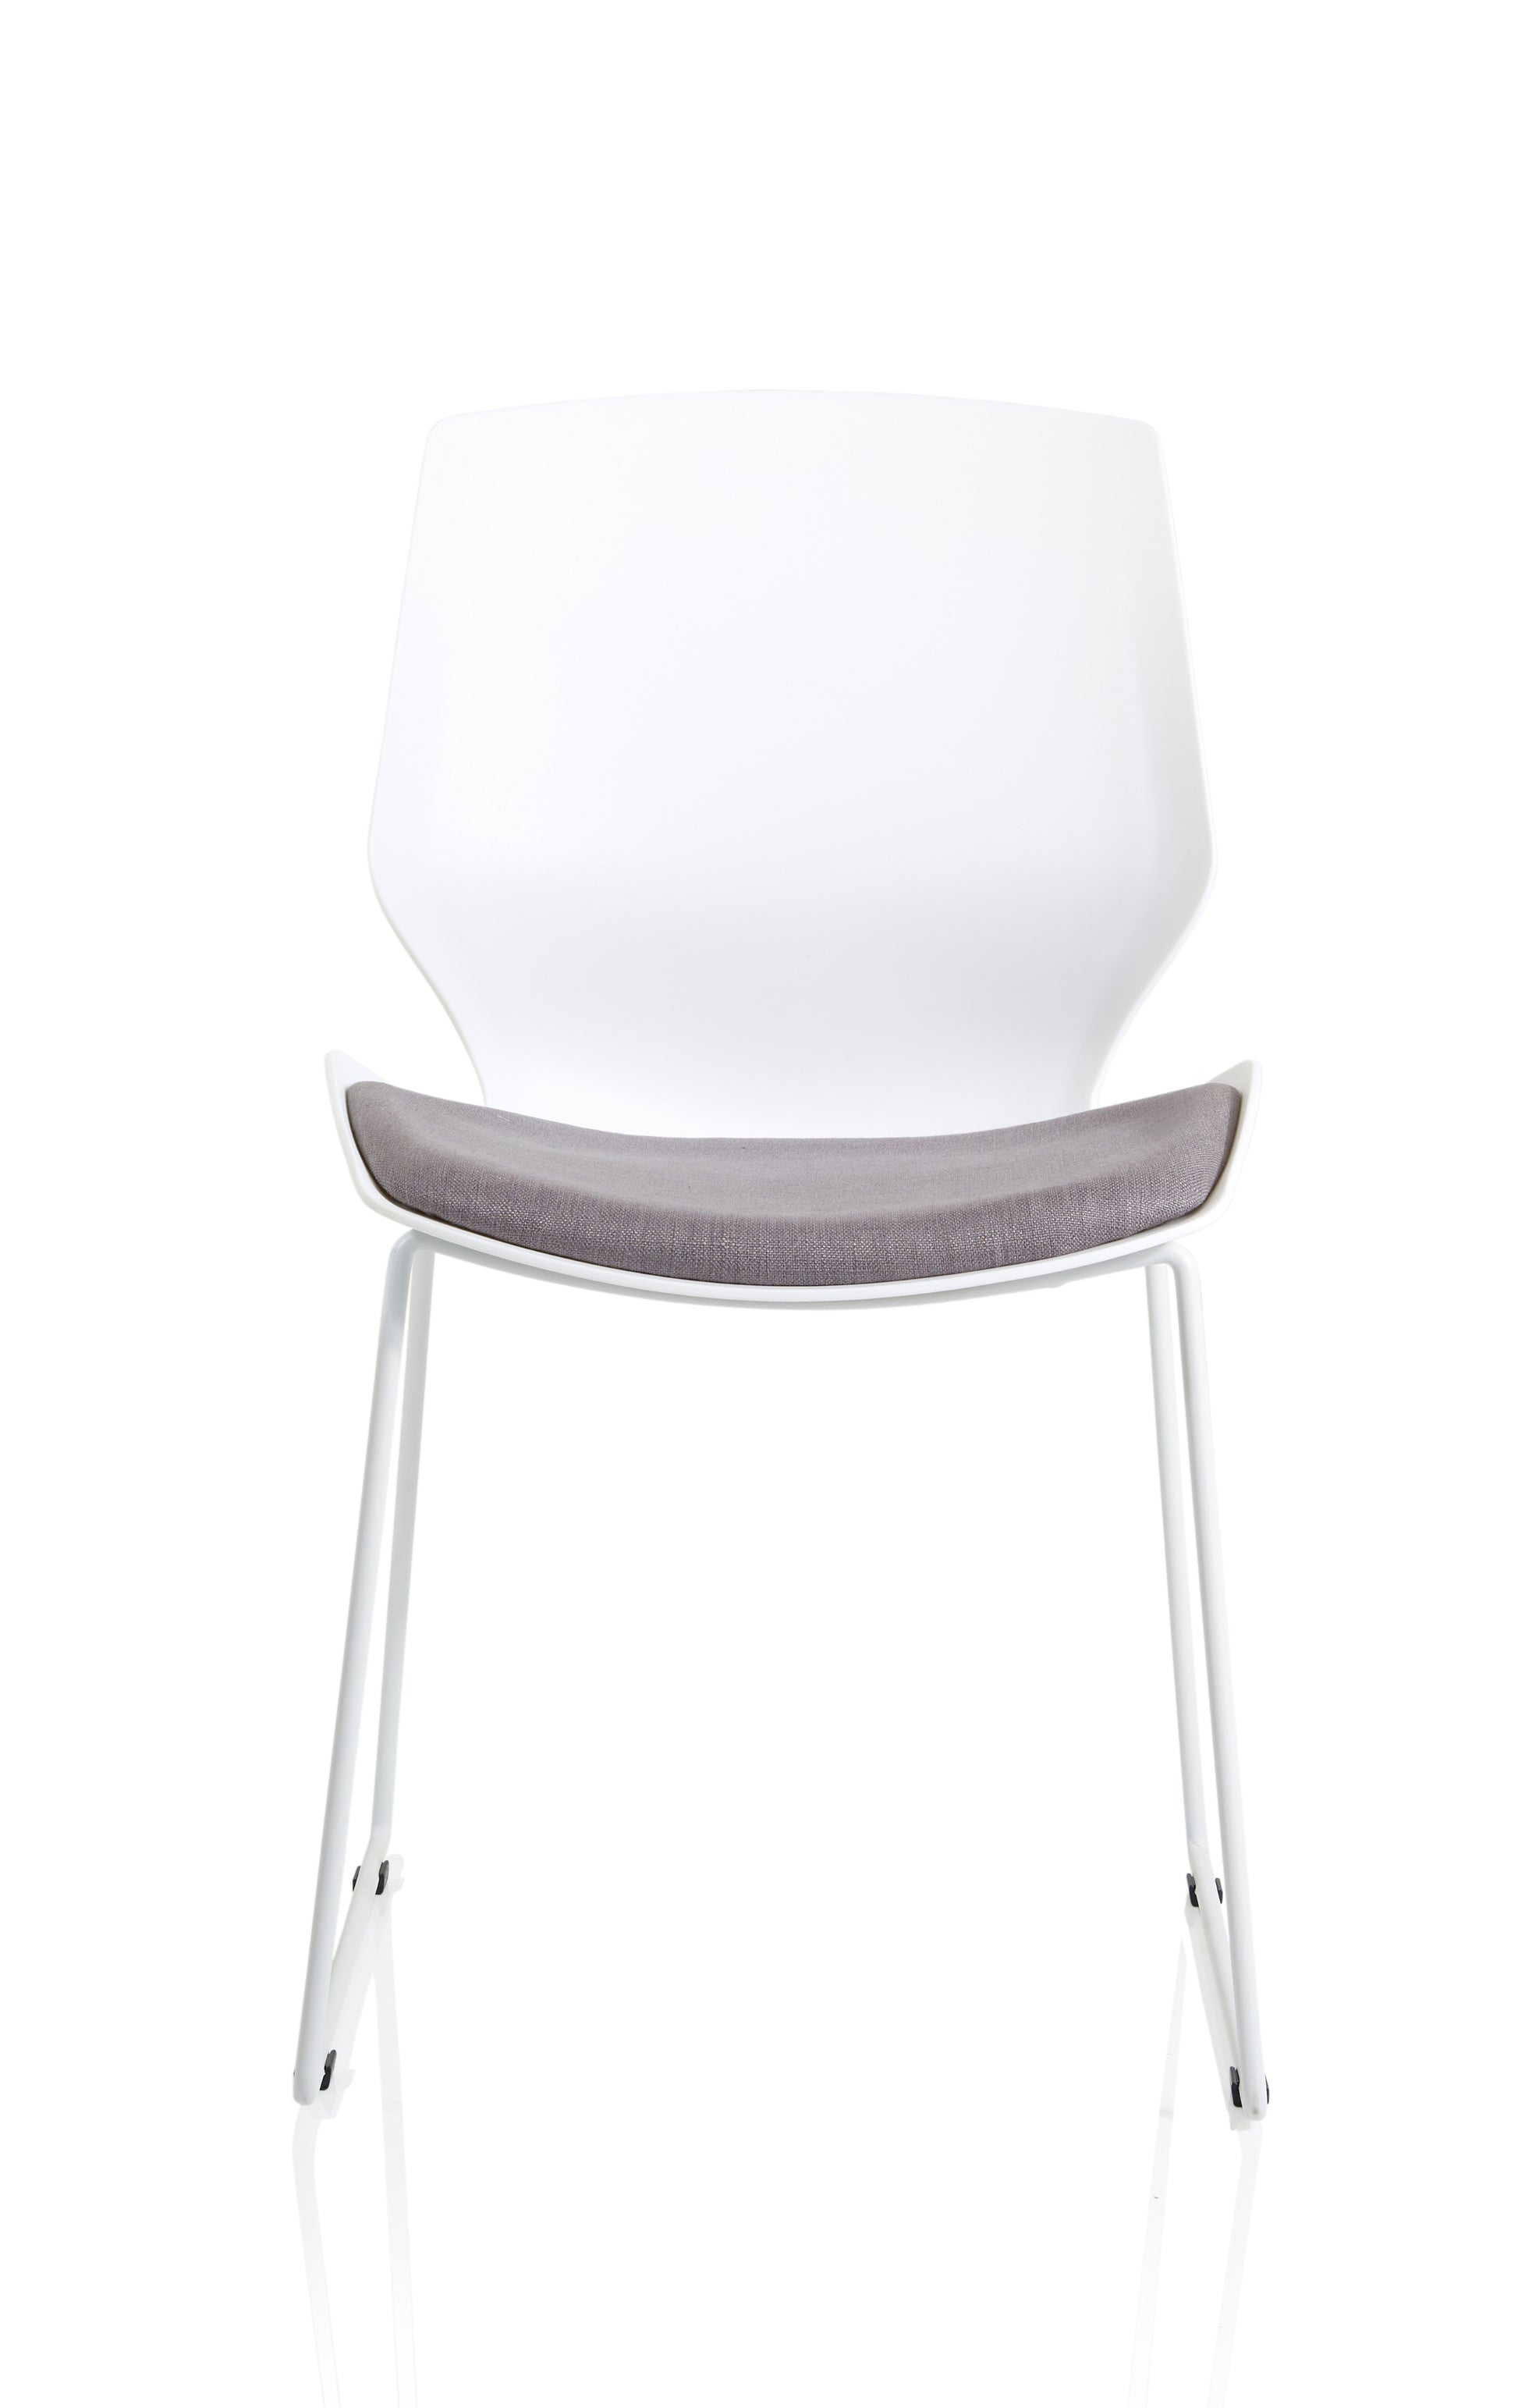 Florence Sled White Frame Fabric Seat Visitor Chair